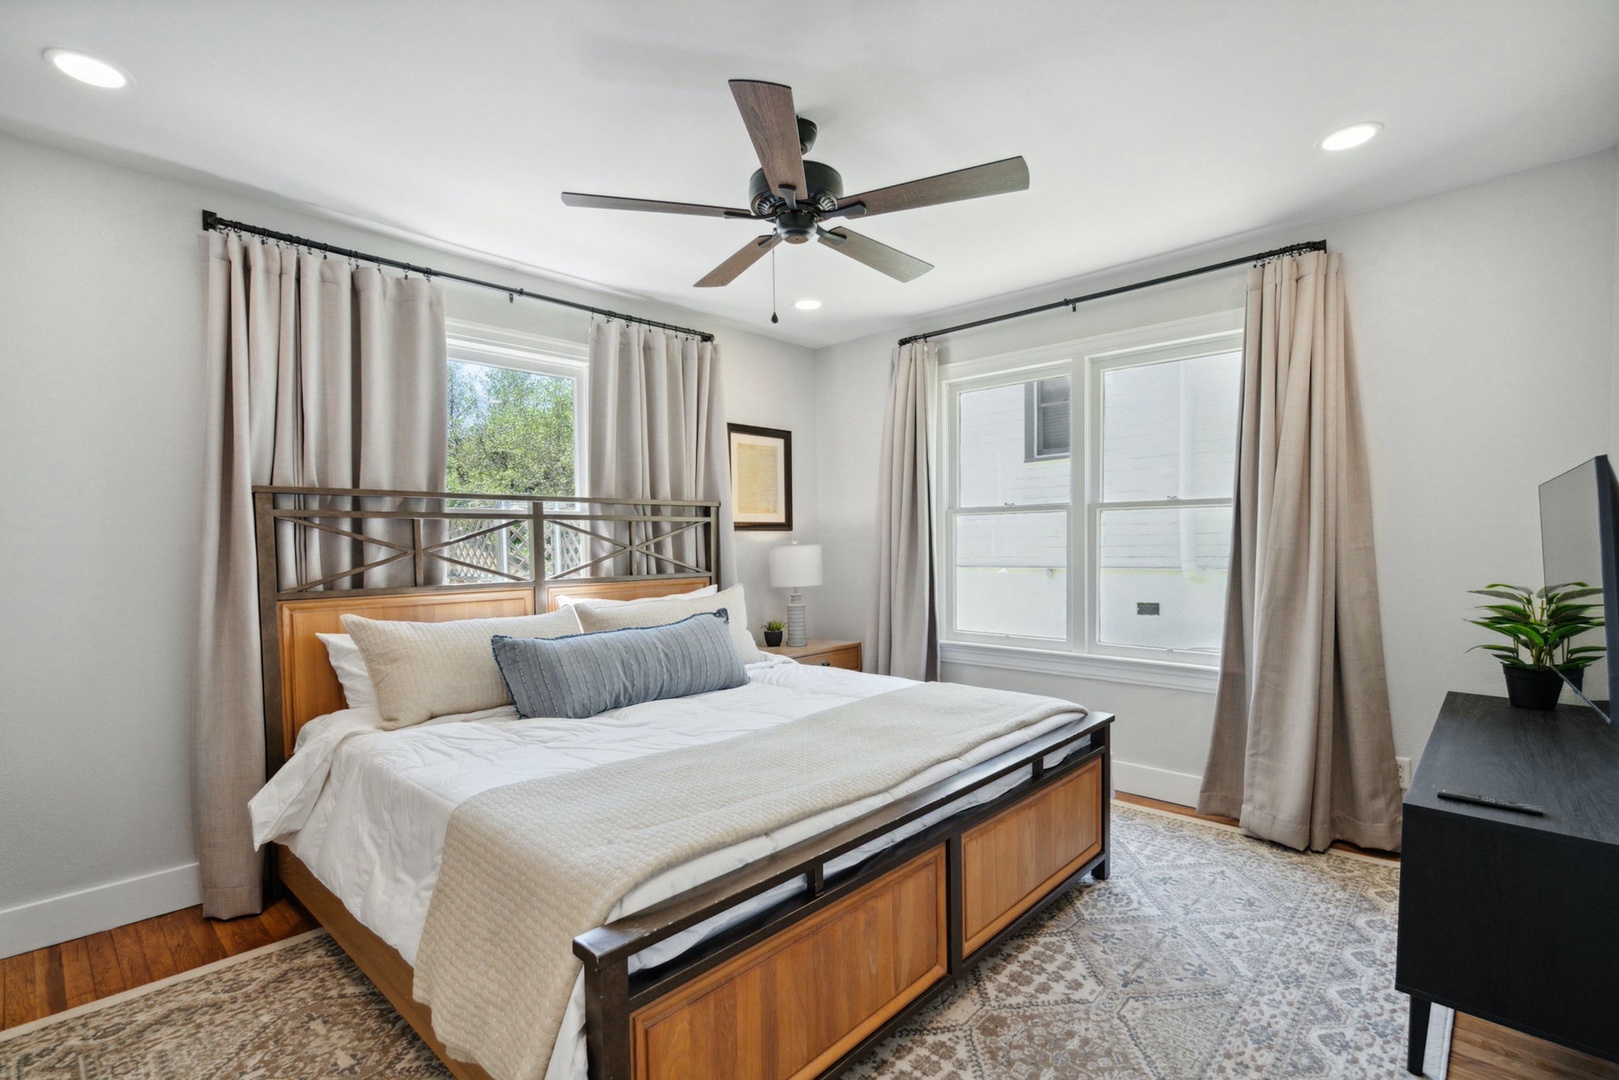 This tranquil bedroom sanctuary includes a king bed & Smart TV